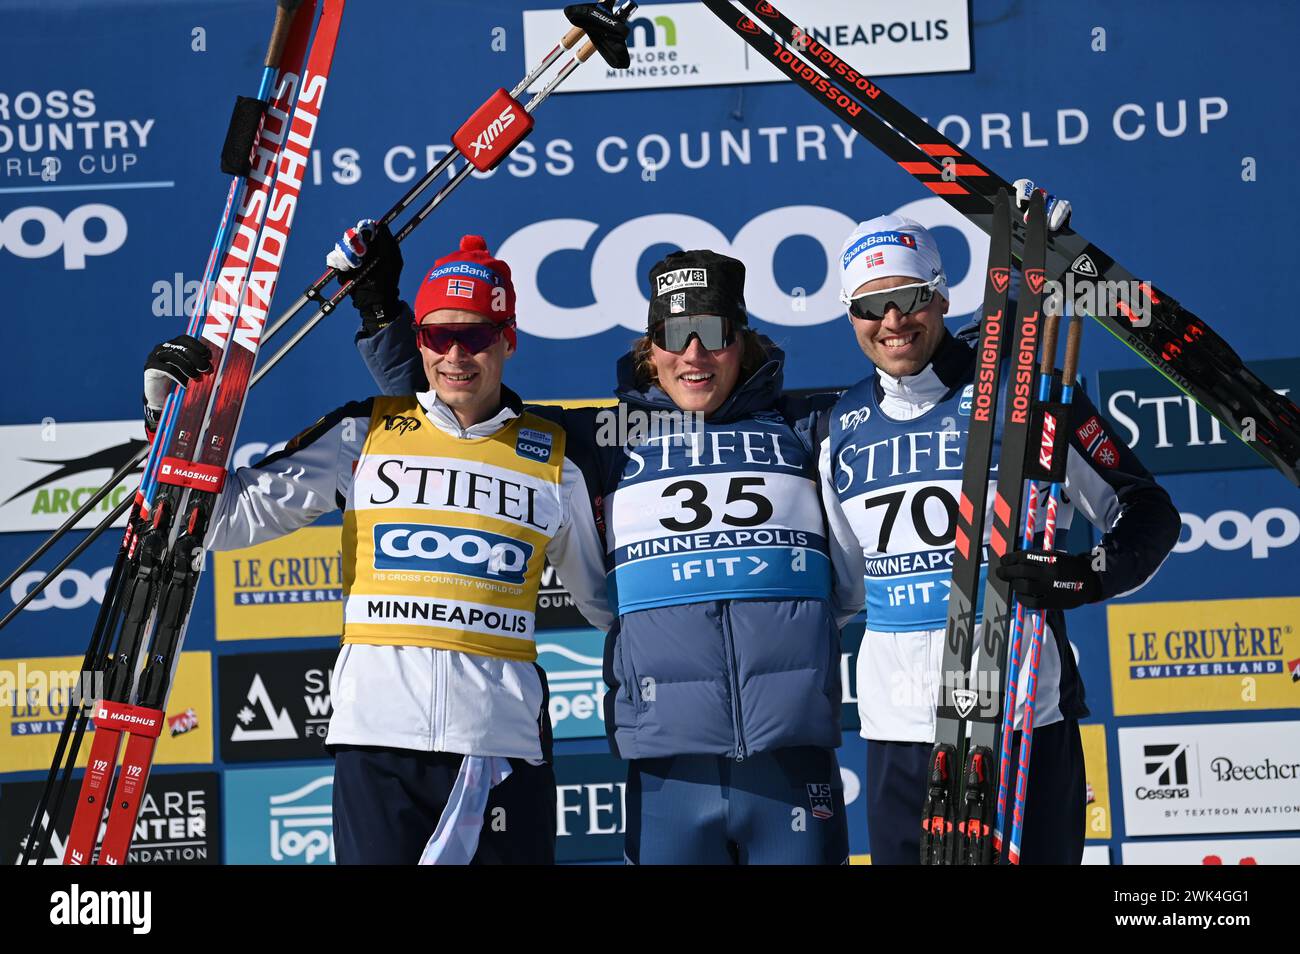 American Gus Schumacher, center, reacts after winning the men's 10 K freestyle at Theodore Wirth Regional Park in Minneapolis, Minnesota, USA.  Left Harald Amundsen Norway second, right, Paal Golberg Norway third. Stock Photo